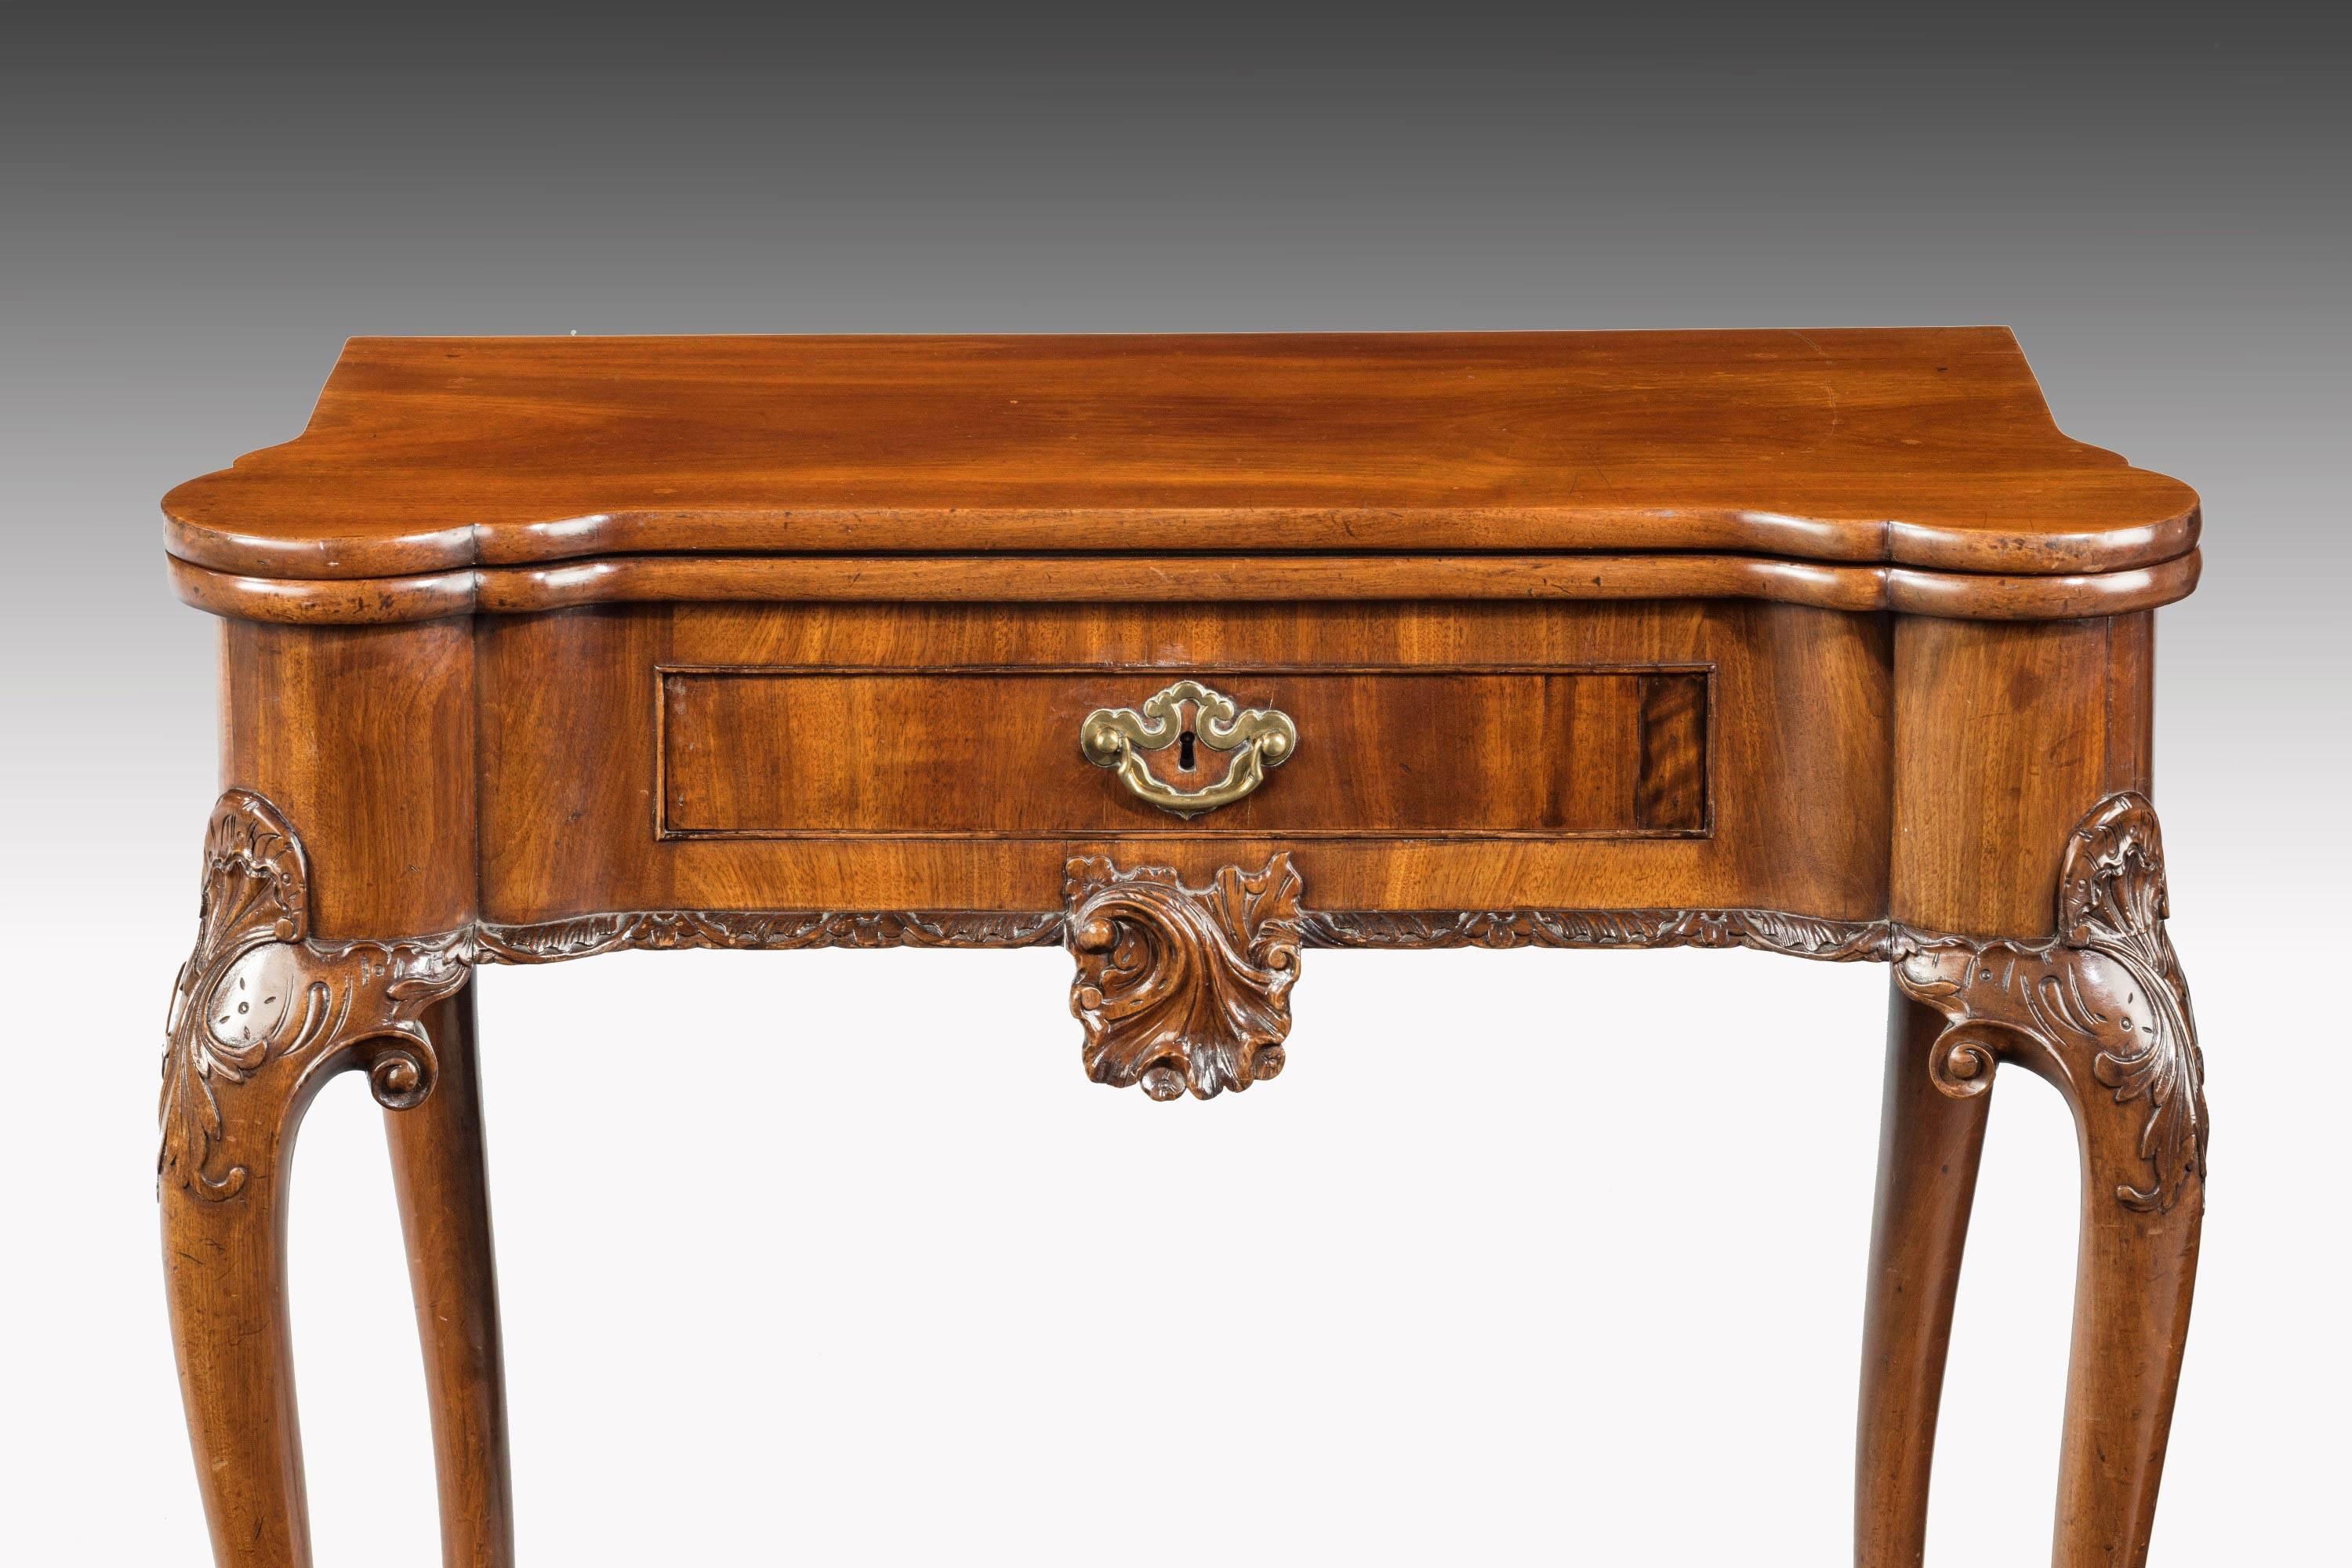 A very good and original mid-18th century card table. The lappet corners with double mouldings. Finely carved cabriole supports terminating in claw and ball feet. A beautifully carved central cartouche below the drawer. 

Measures: When open the